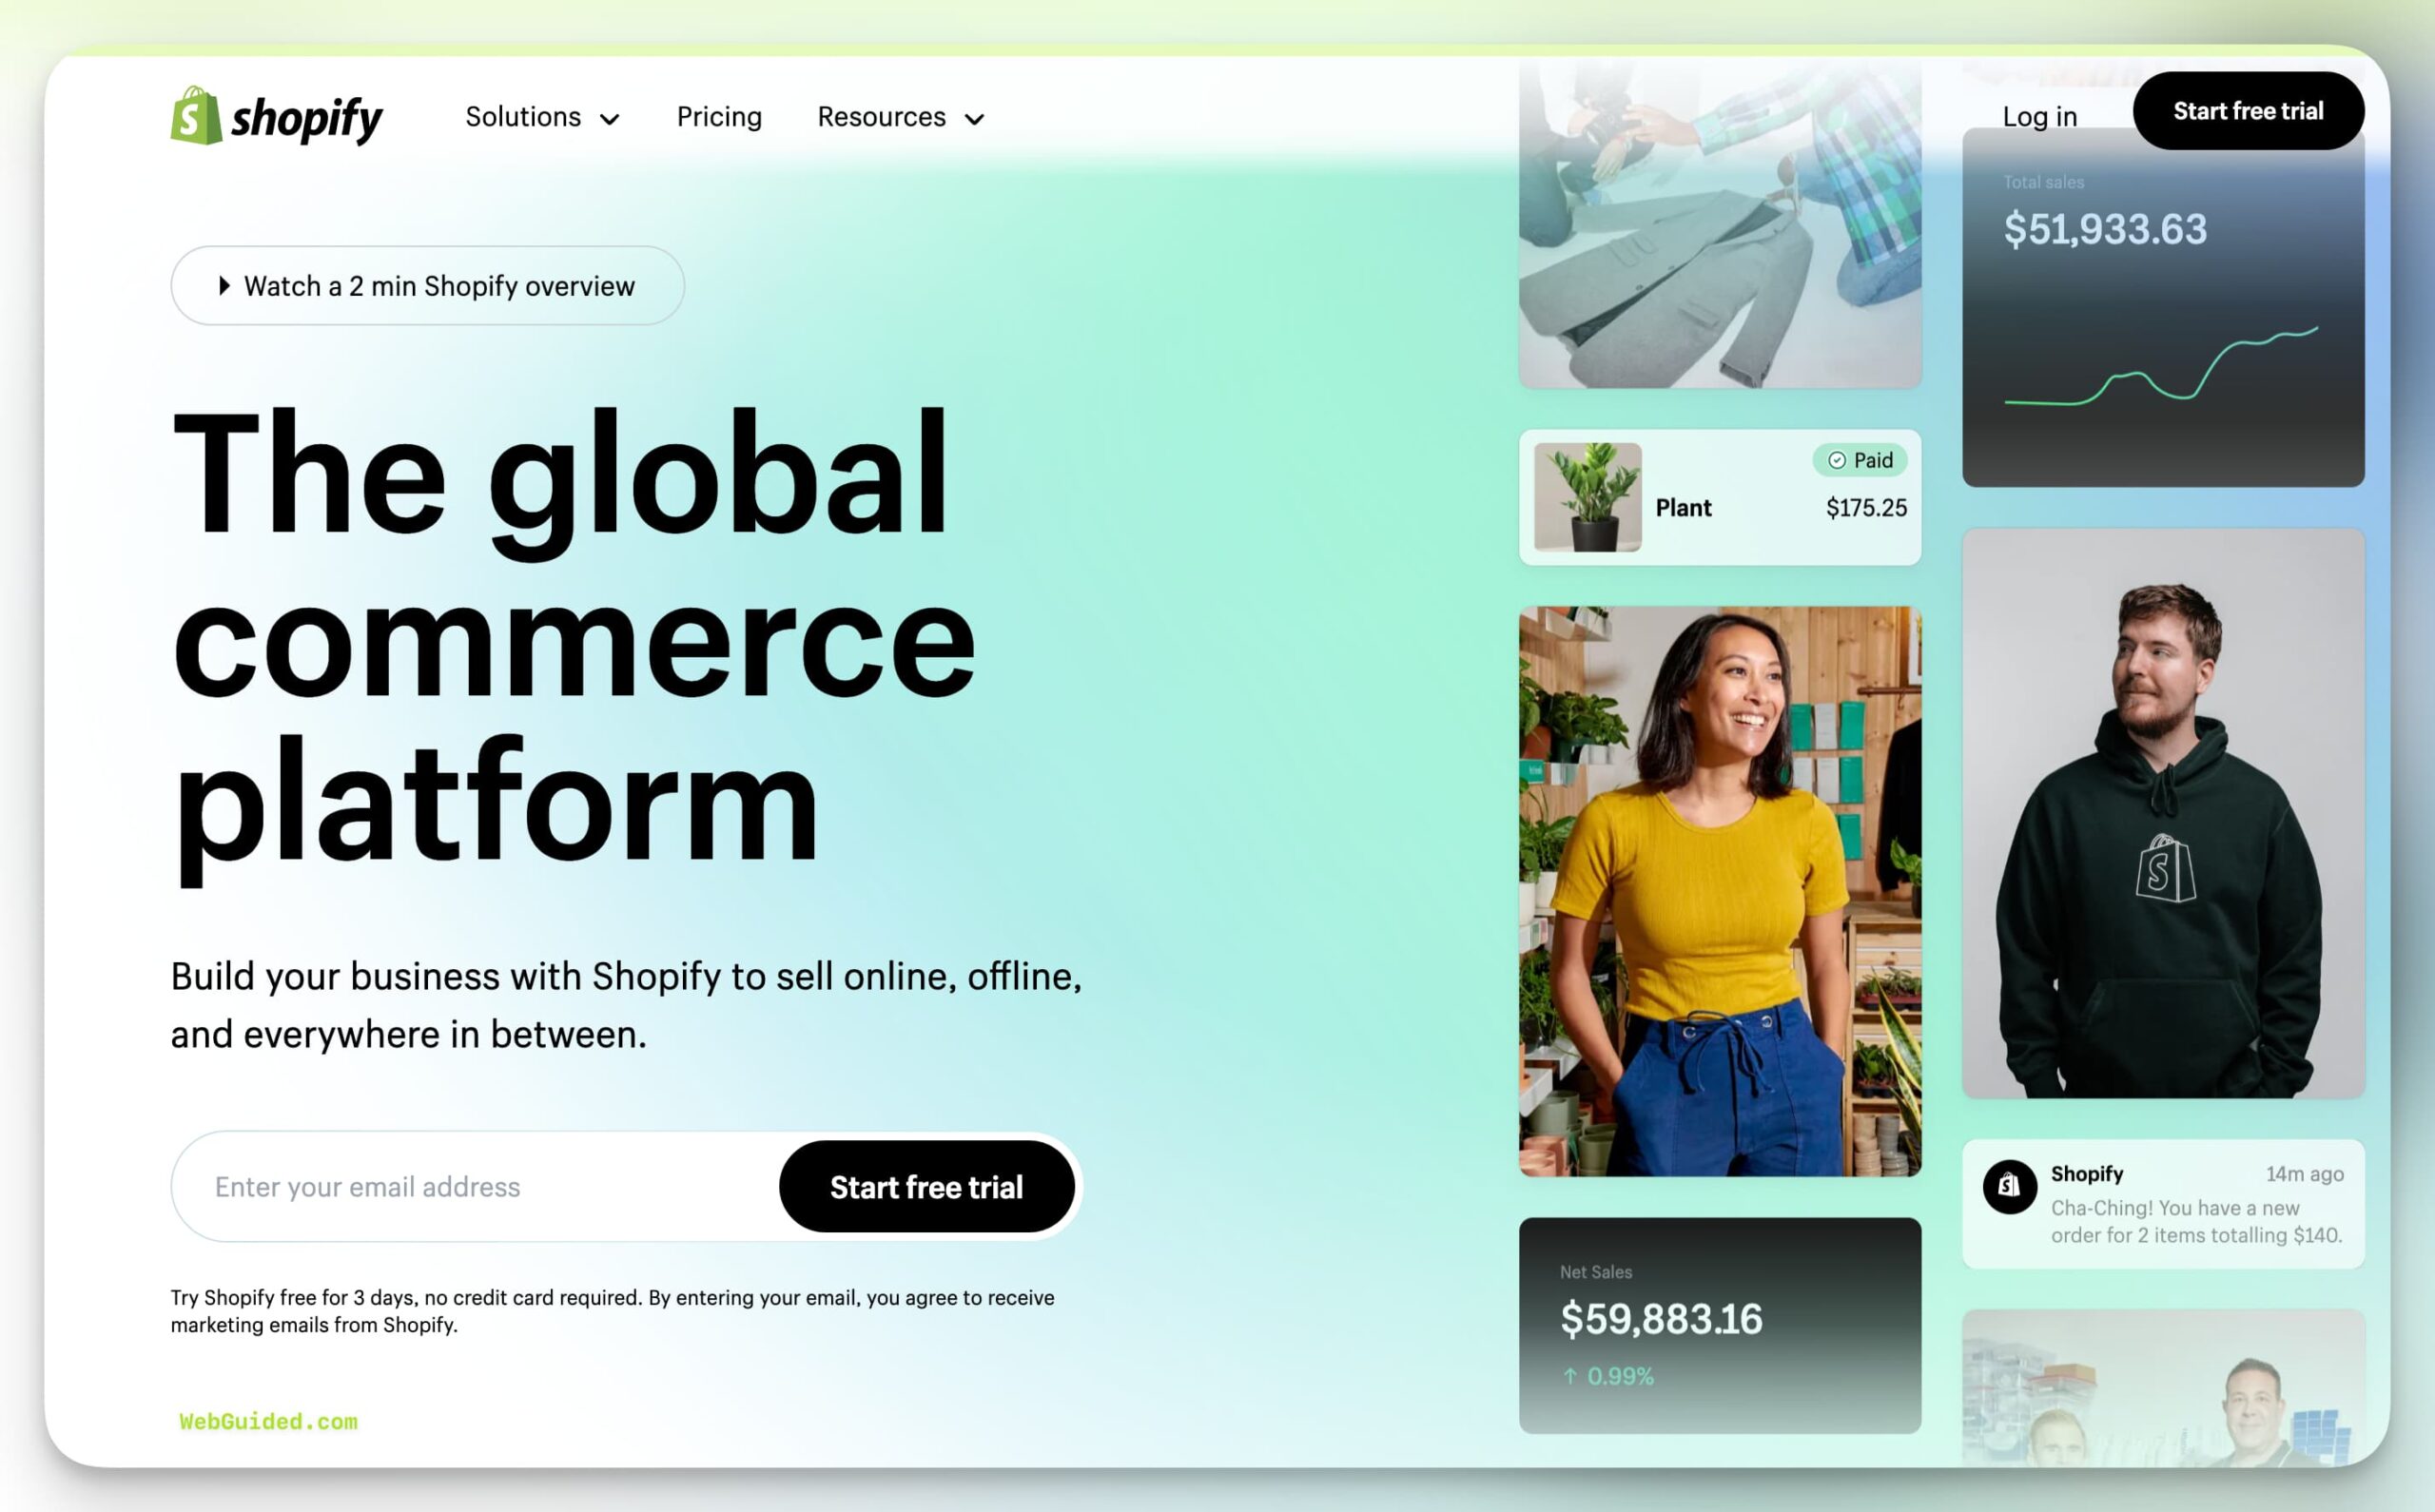 Shopify popular example of an eCommerce platform